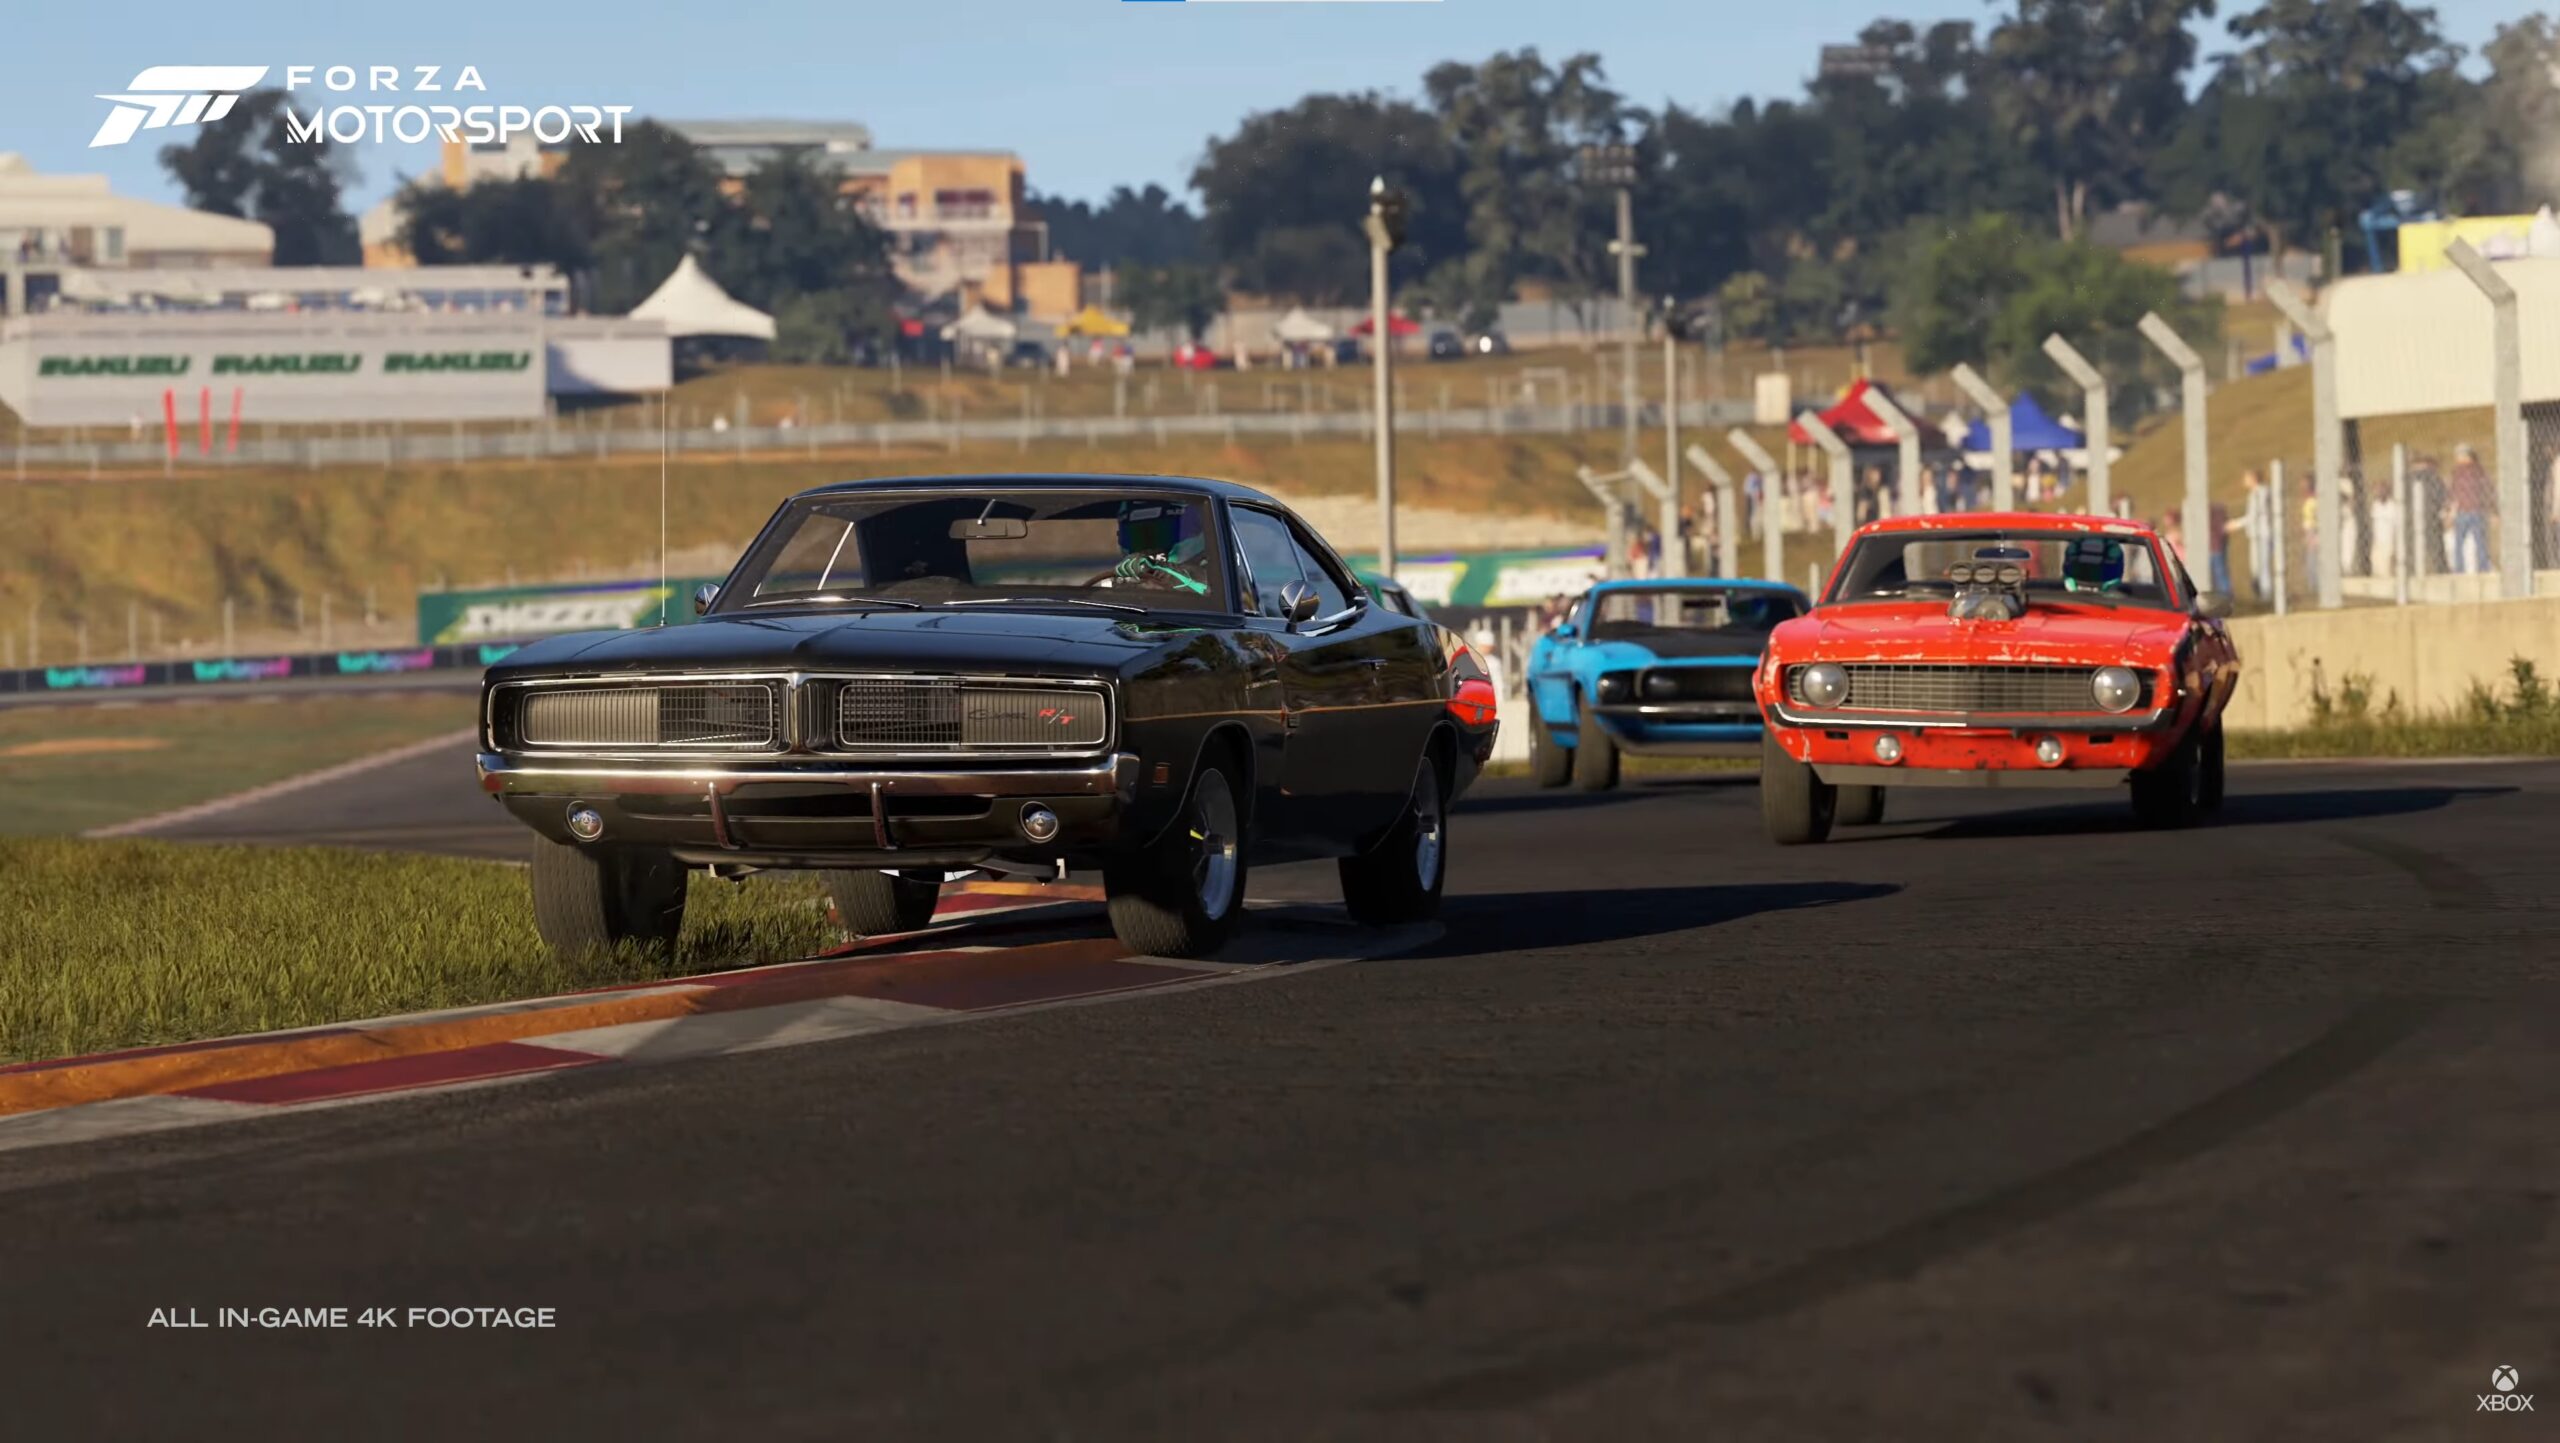 Forza Motorsport release date, cars, trailers, gameplay, and more